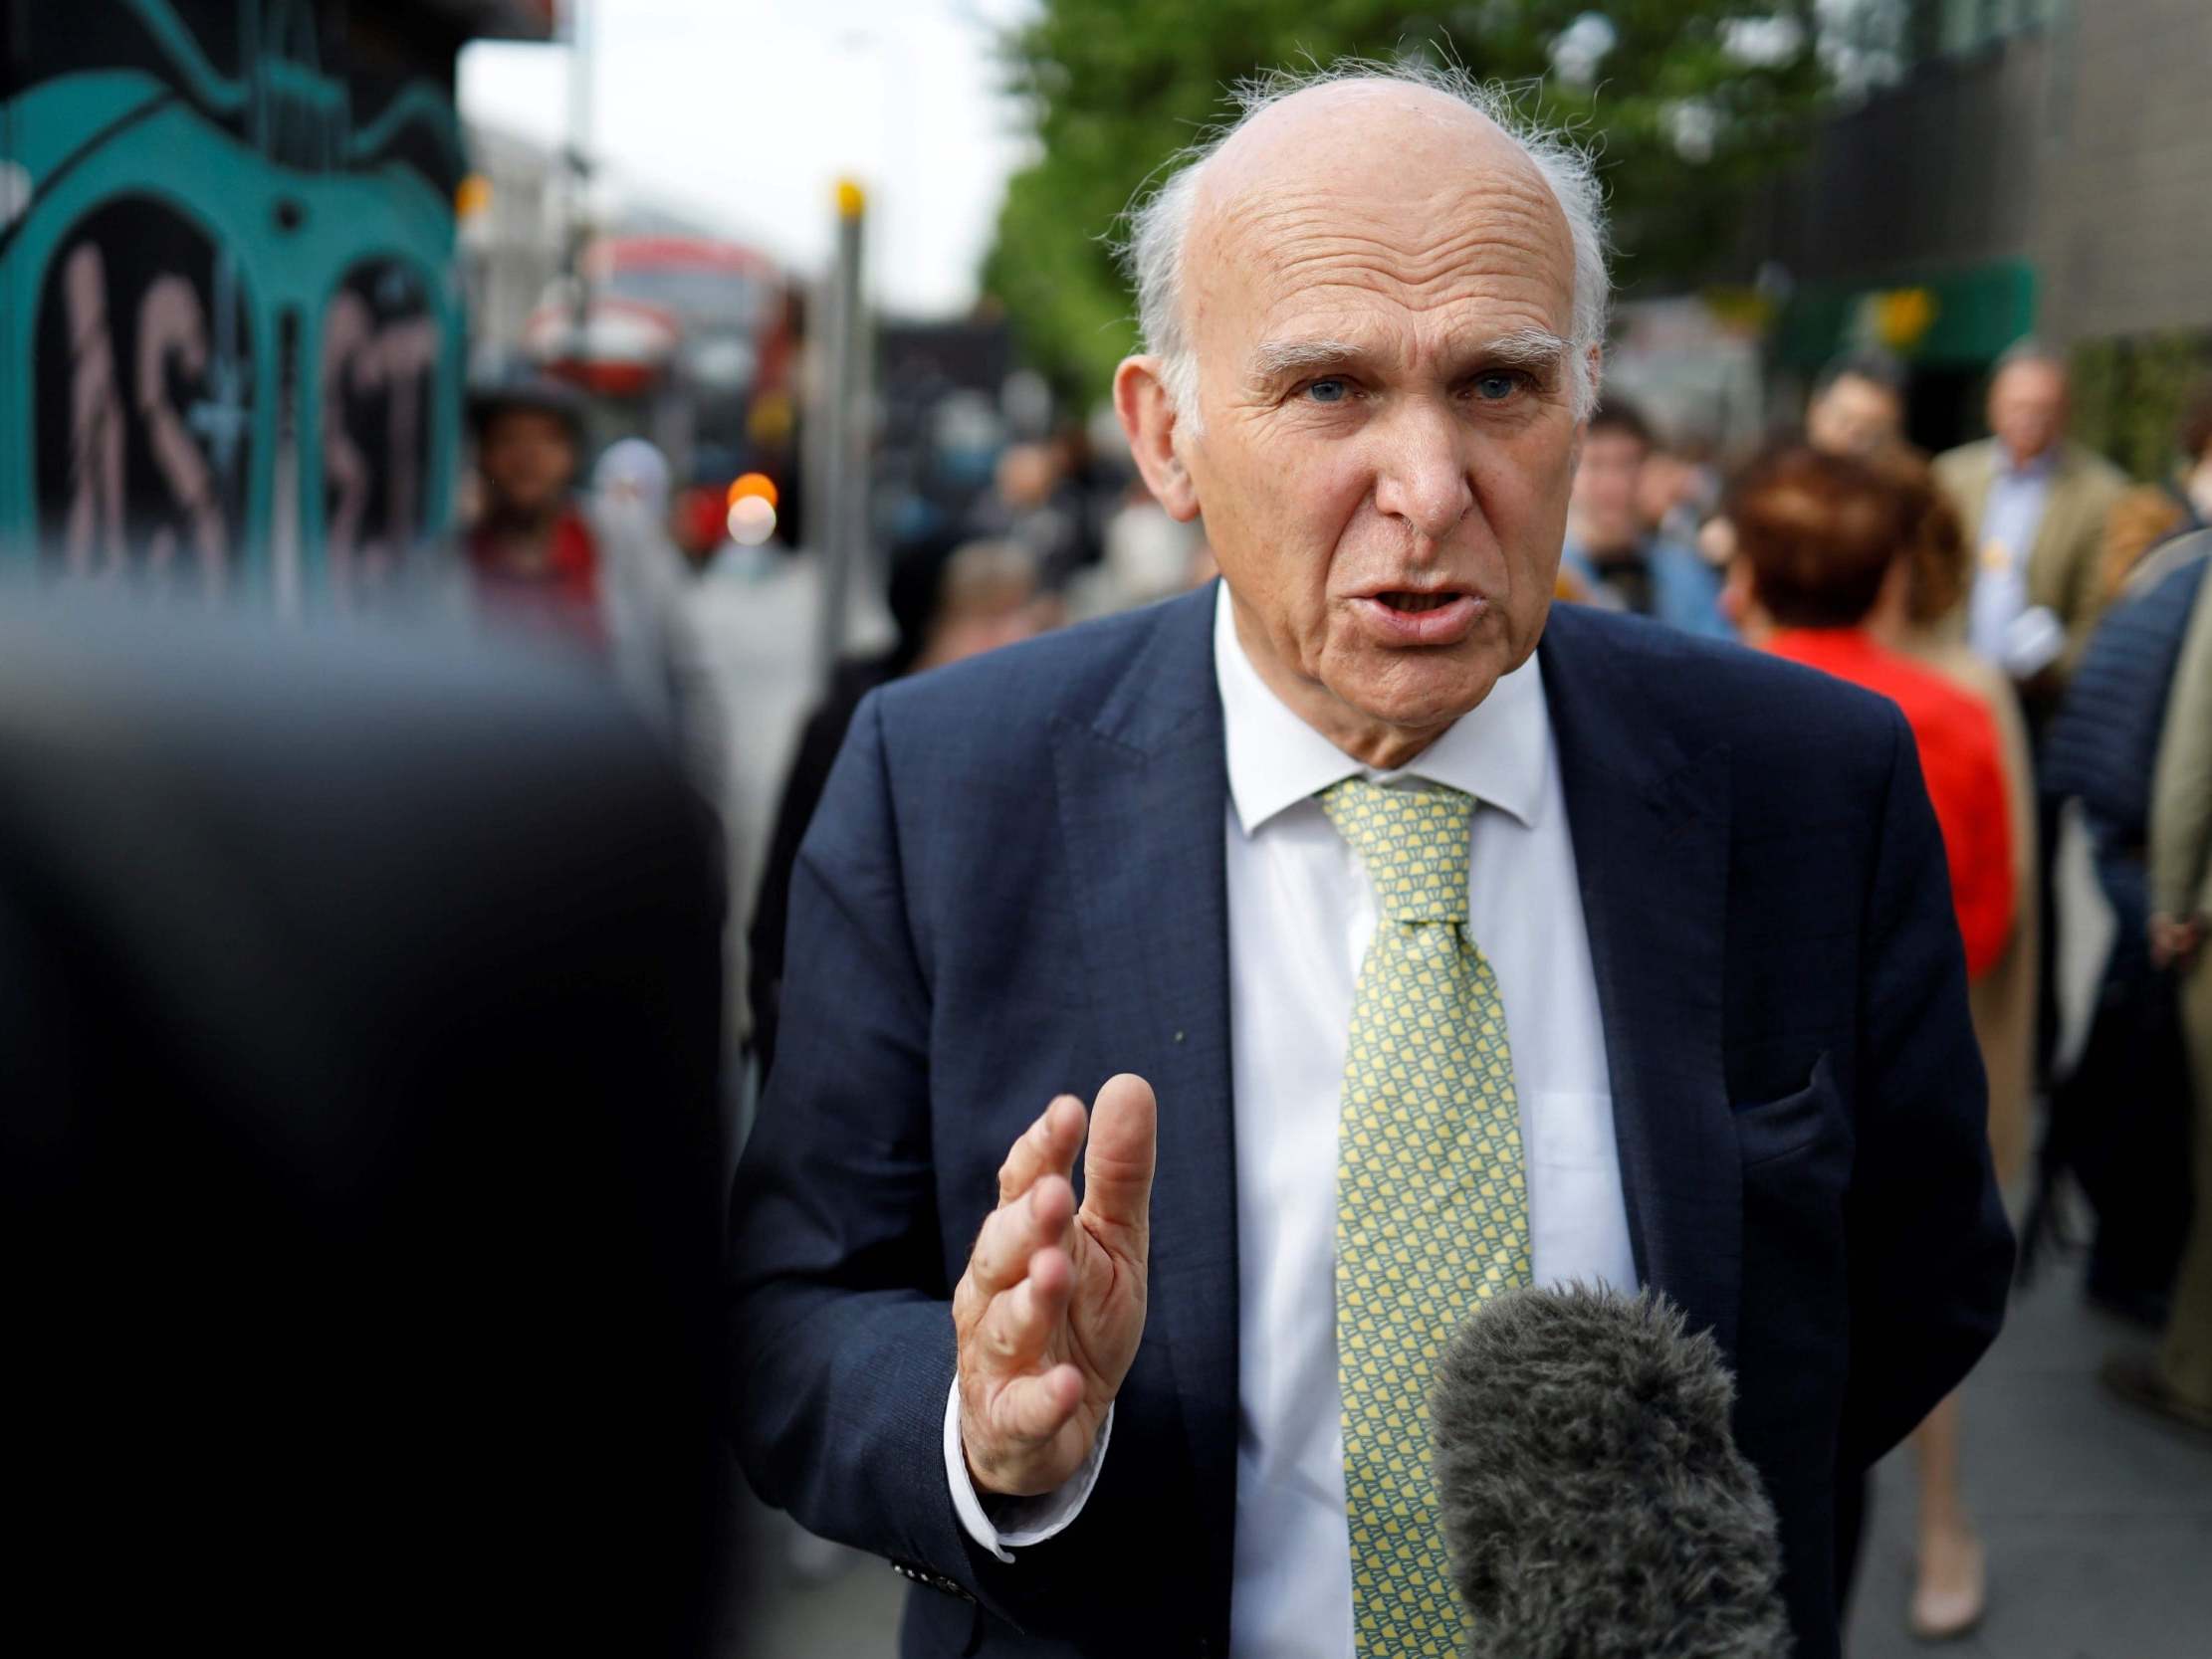 Related video: Vince Cable criticises other anti-Brexit parties over Euro elections